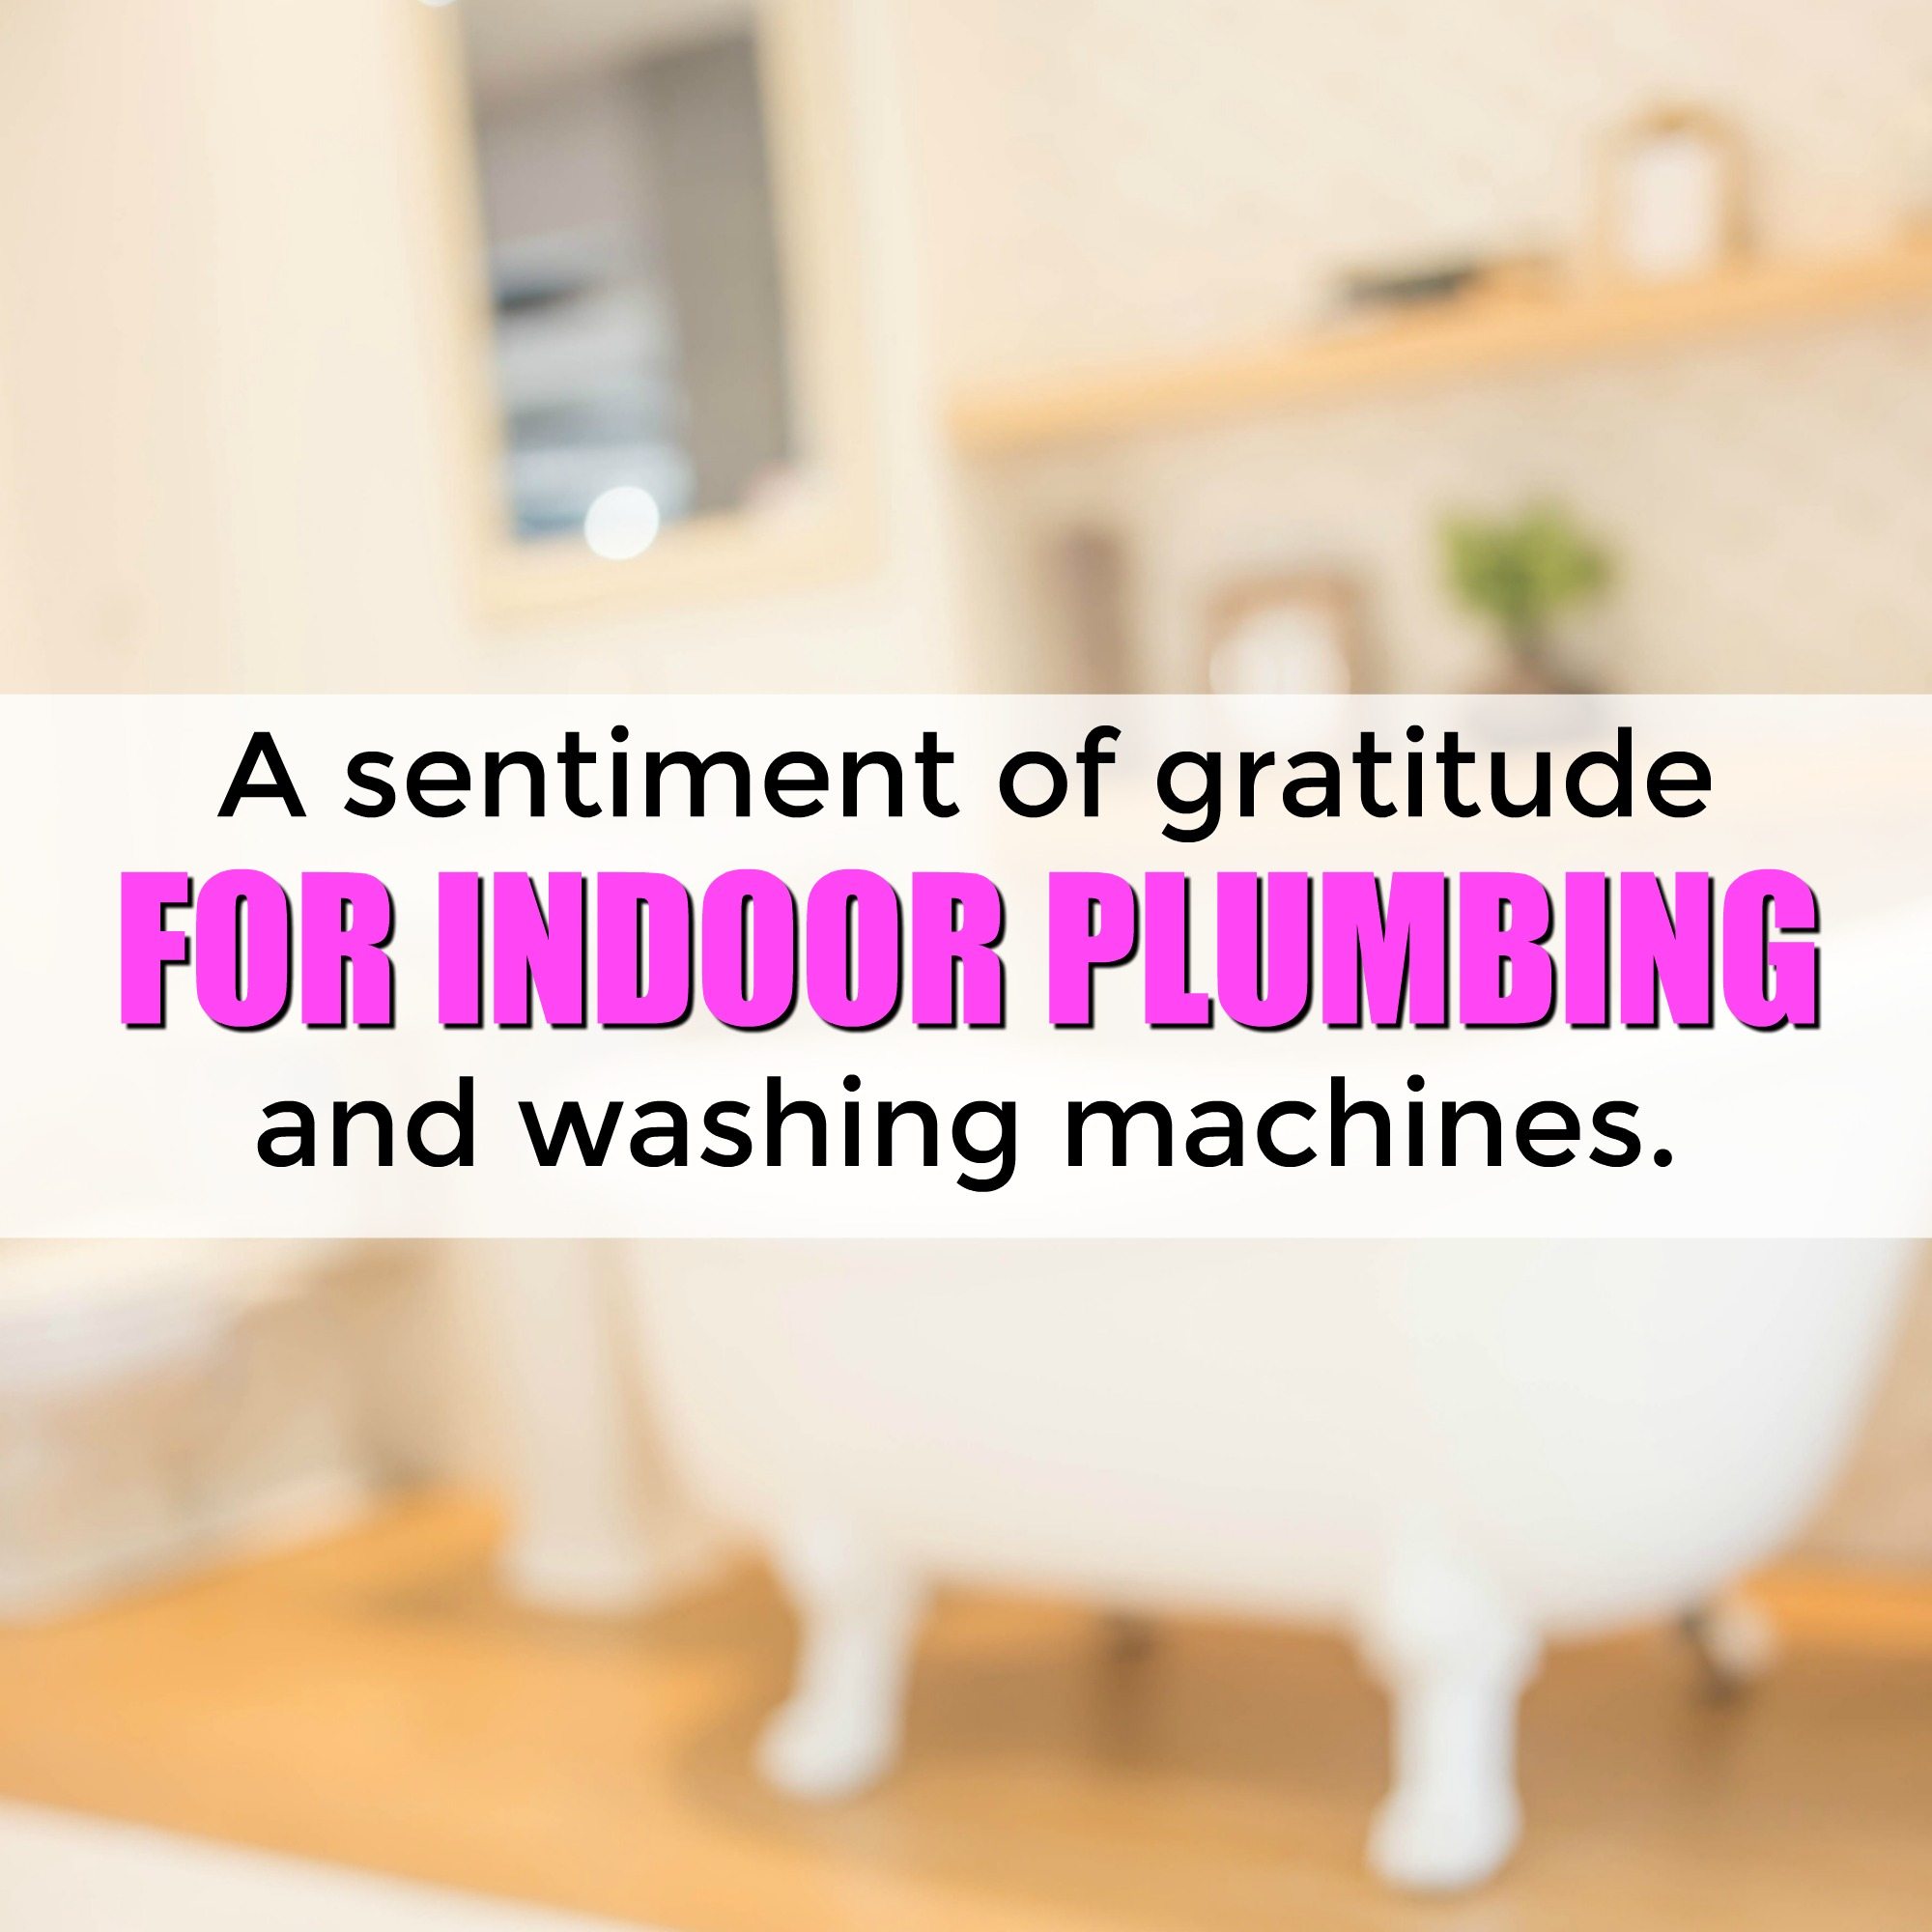 A sentiment of gratitude for indoor plumbing and washing machines.